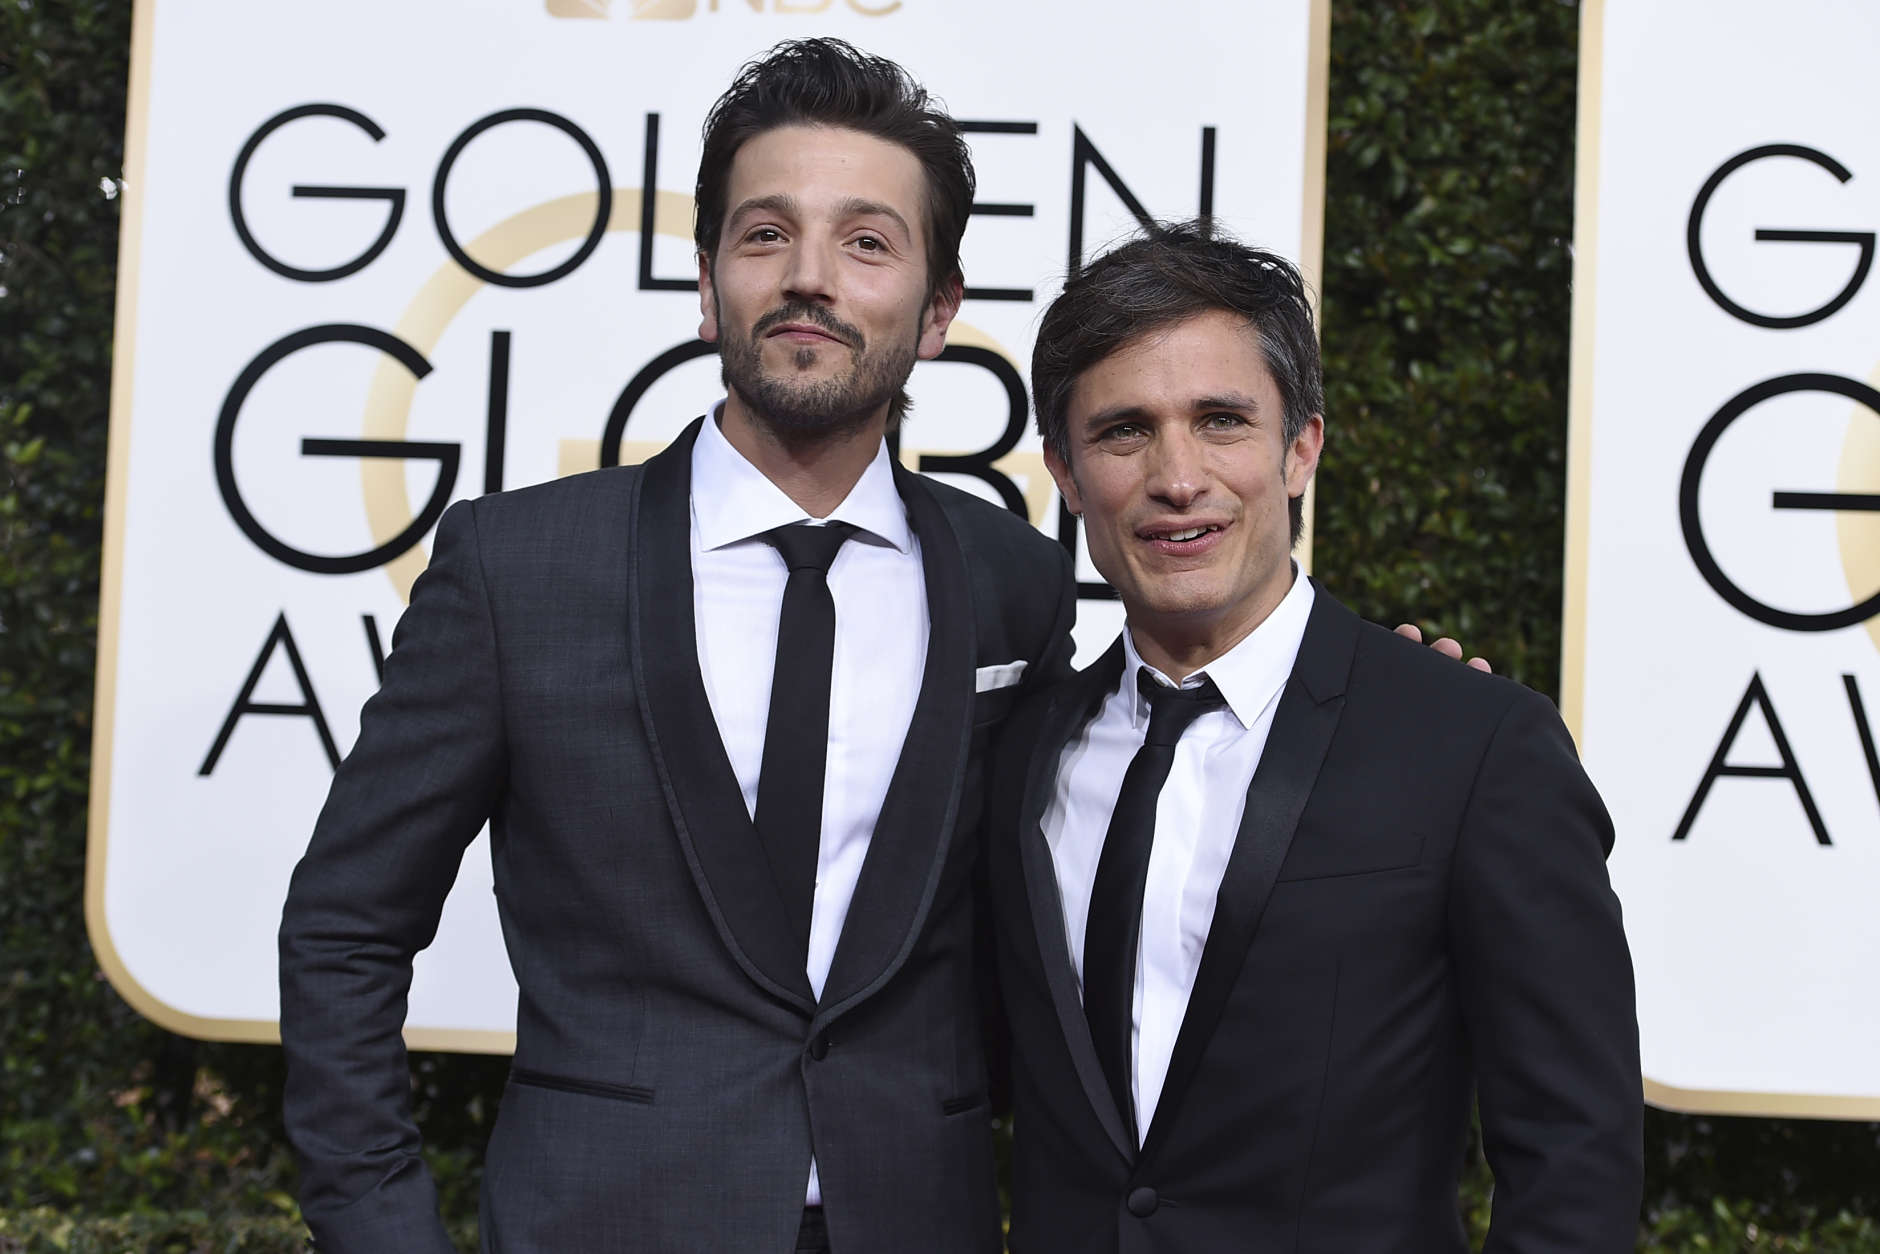 Diego Luna, left, and Gael Garcia Bernal arrive at the 74th annual Golden Globe Awards at the Beverly Hilton Hotel on Sunday, Jan. 8, 2017, in Beverly Hills, Calif. (Photo by Jordan Strauss/Invision/AP)